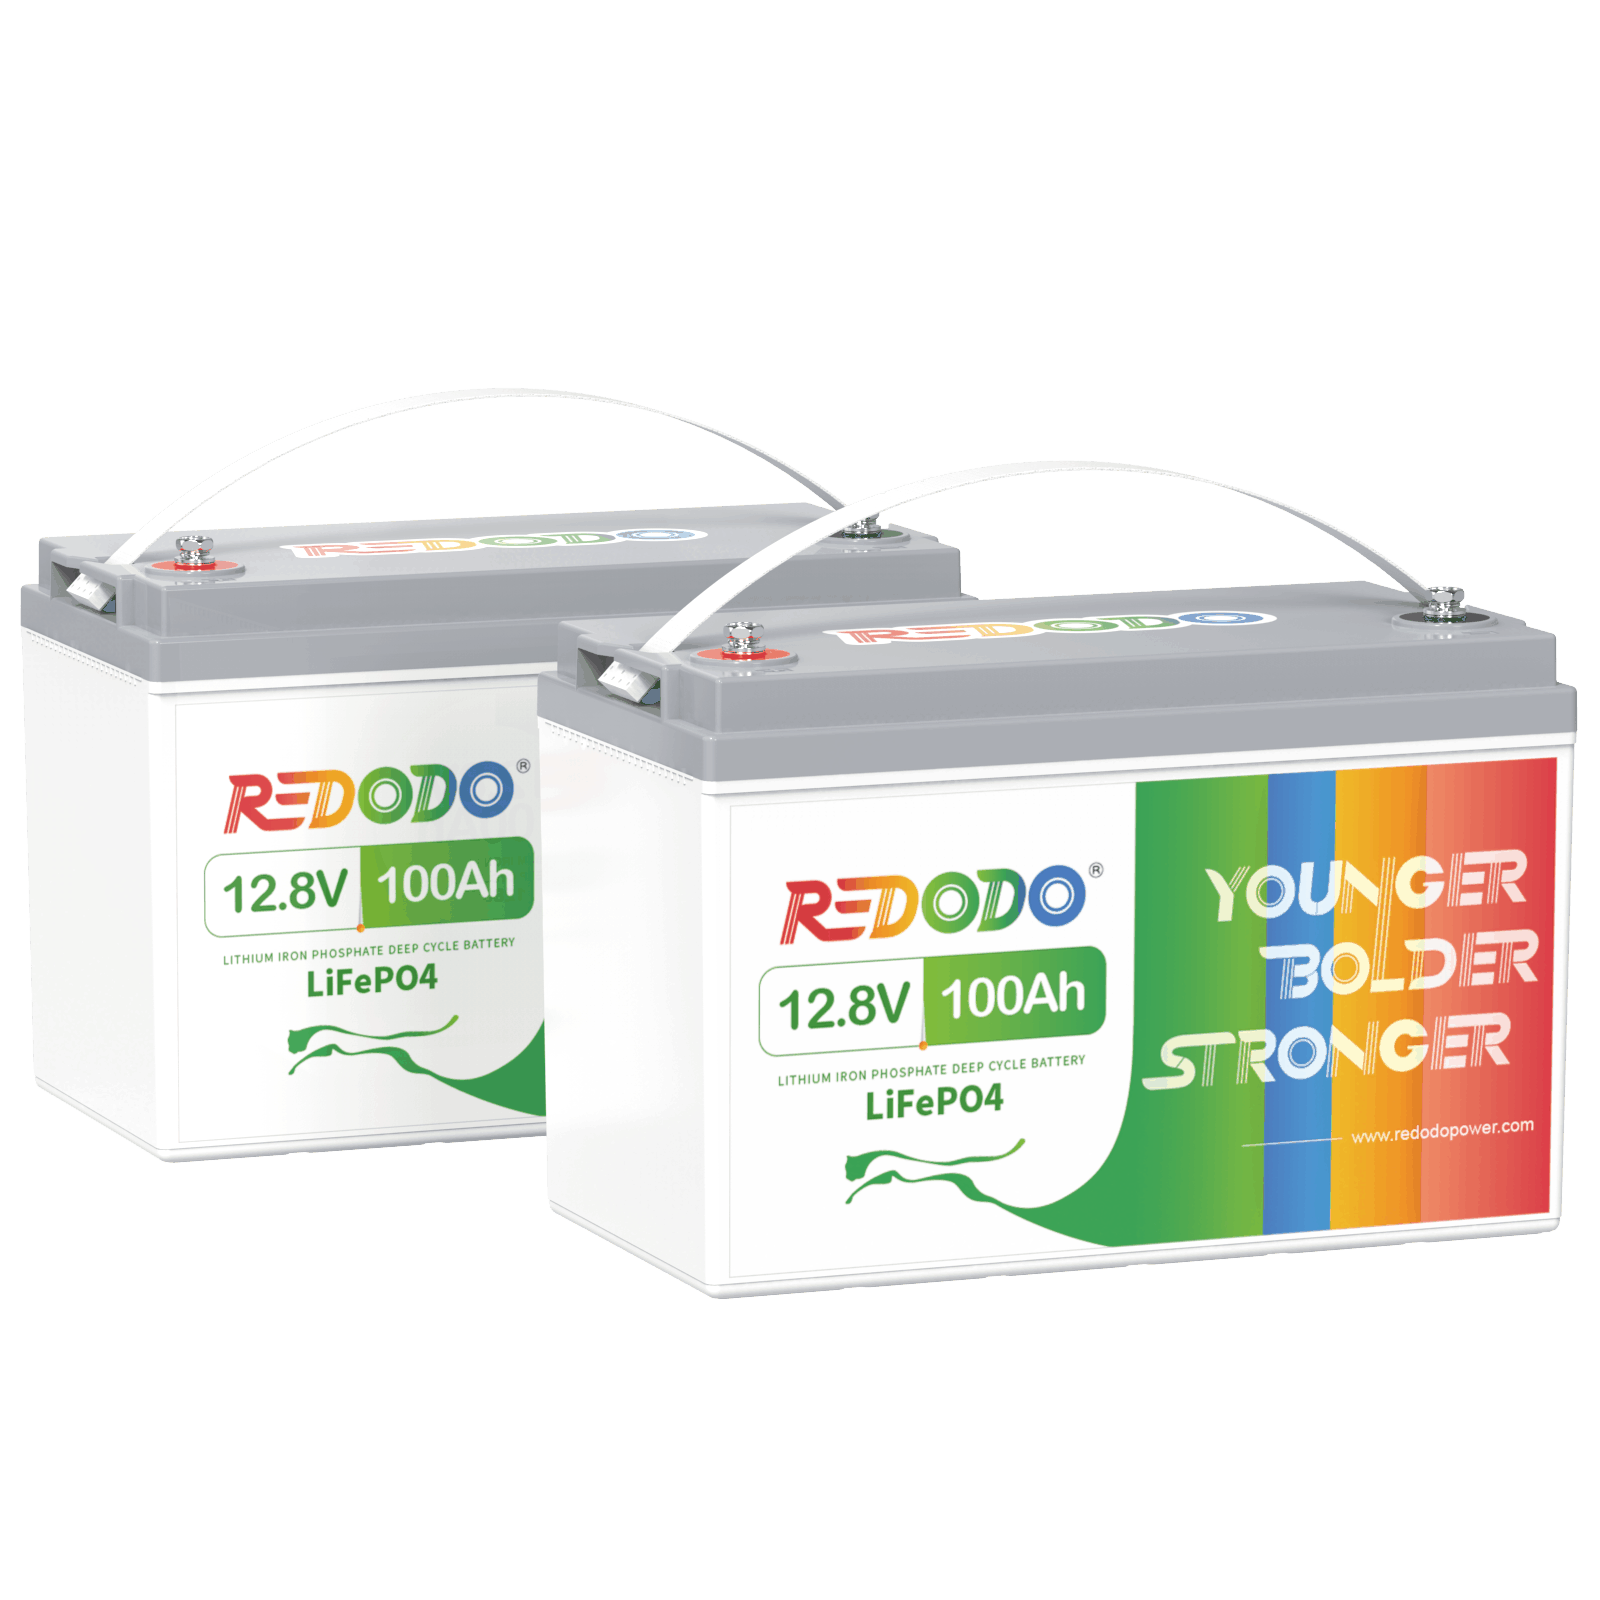 Redodo 12V 100Ah LiFePO4 Lithium Iron Phosphate Battery Built-in 100A BMS